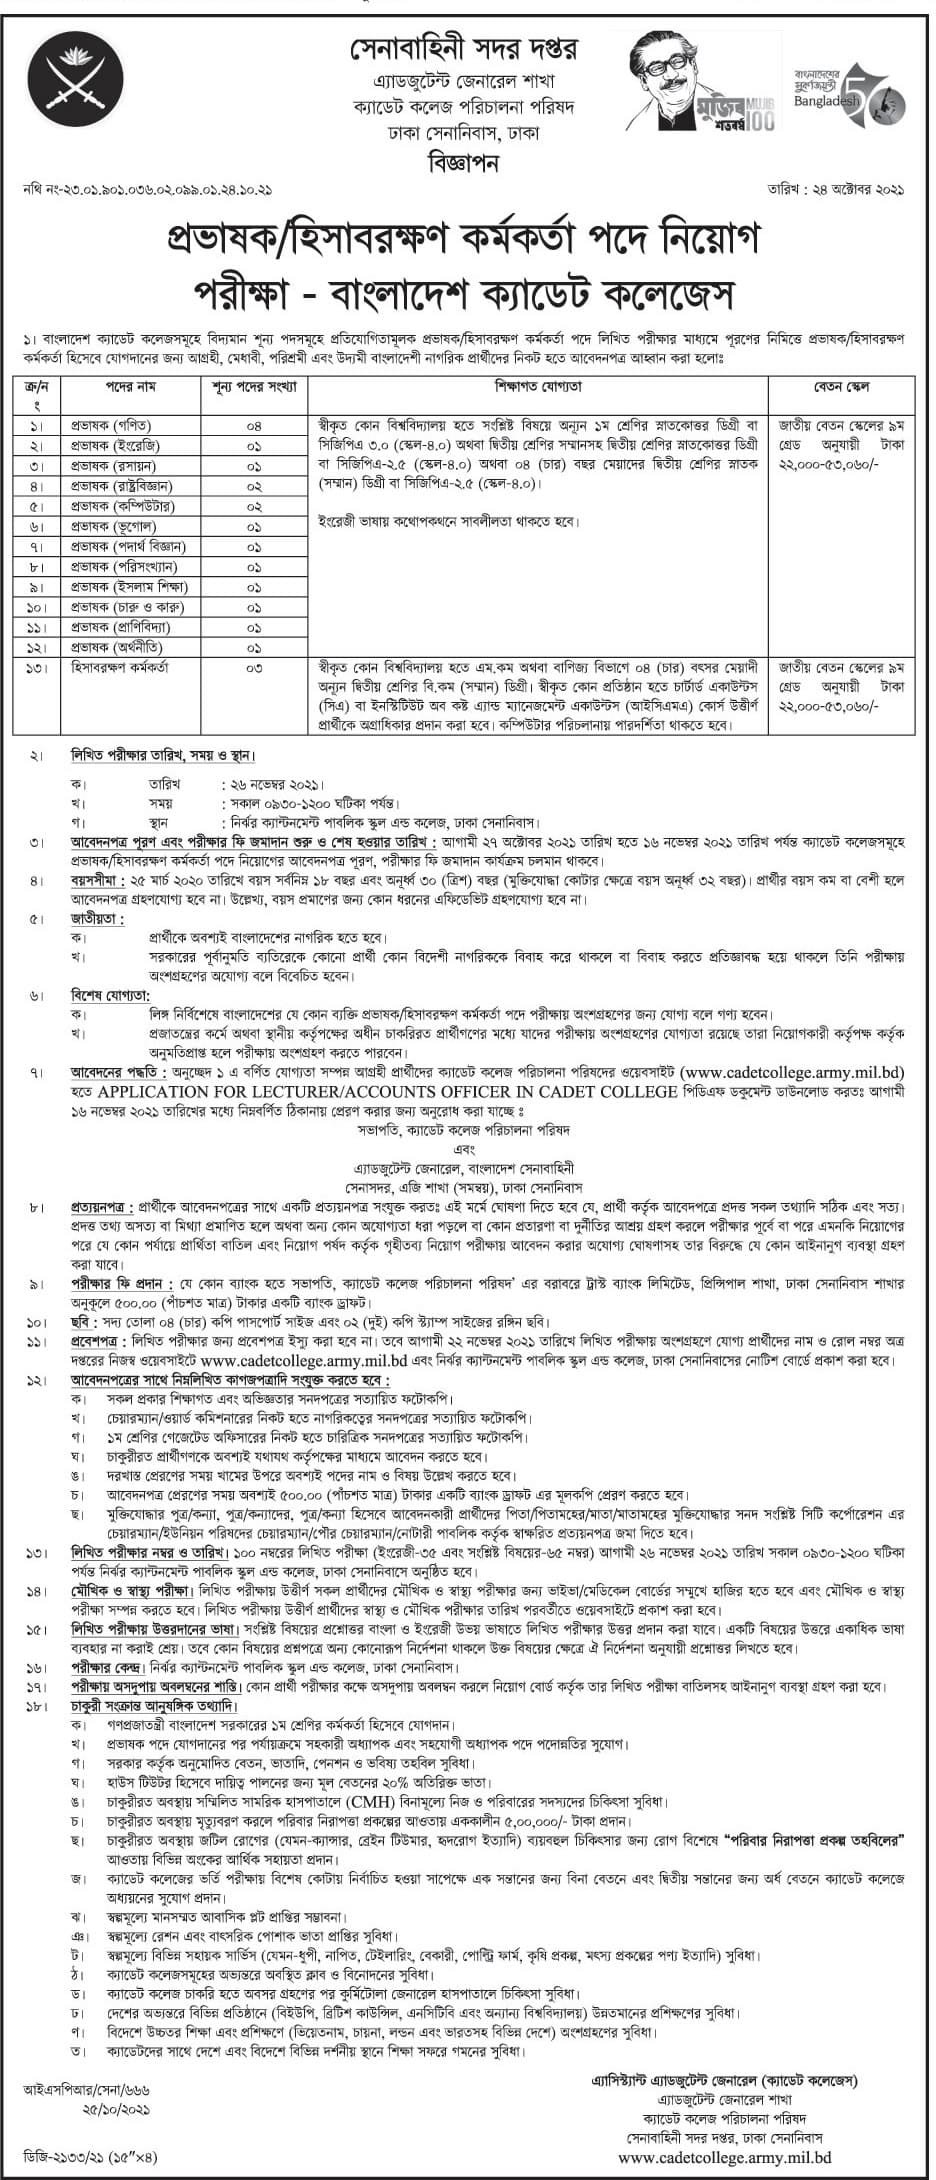 Army Cadet Colleges Job Circular 2021 – cadetcollege.army.mil.bd